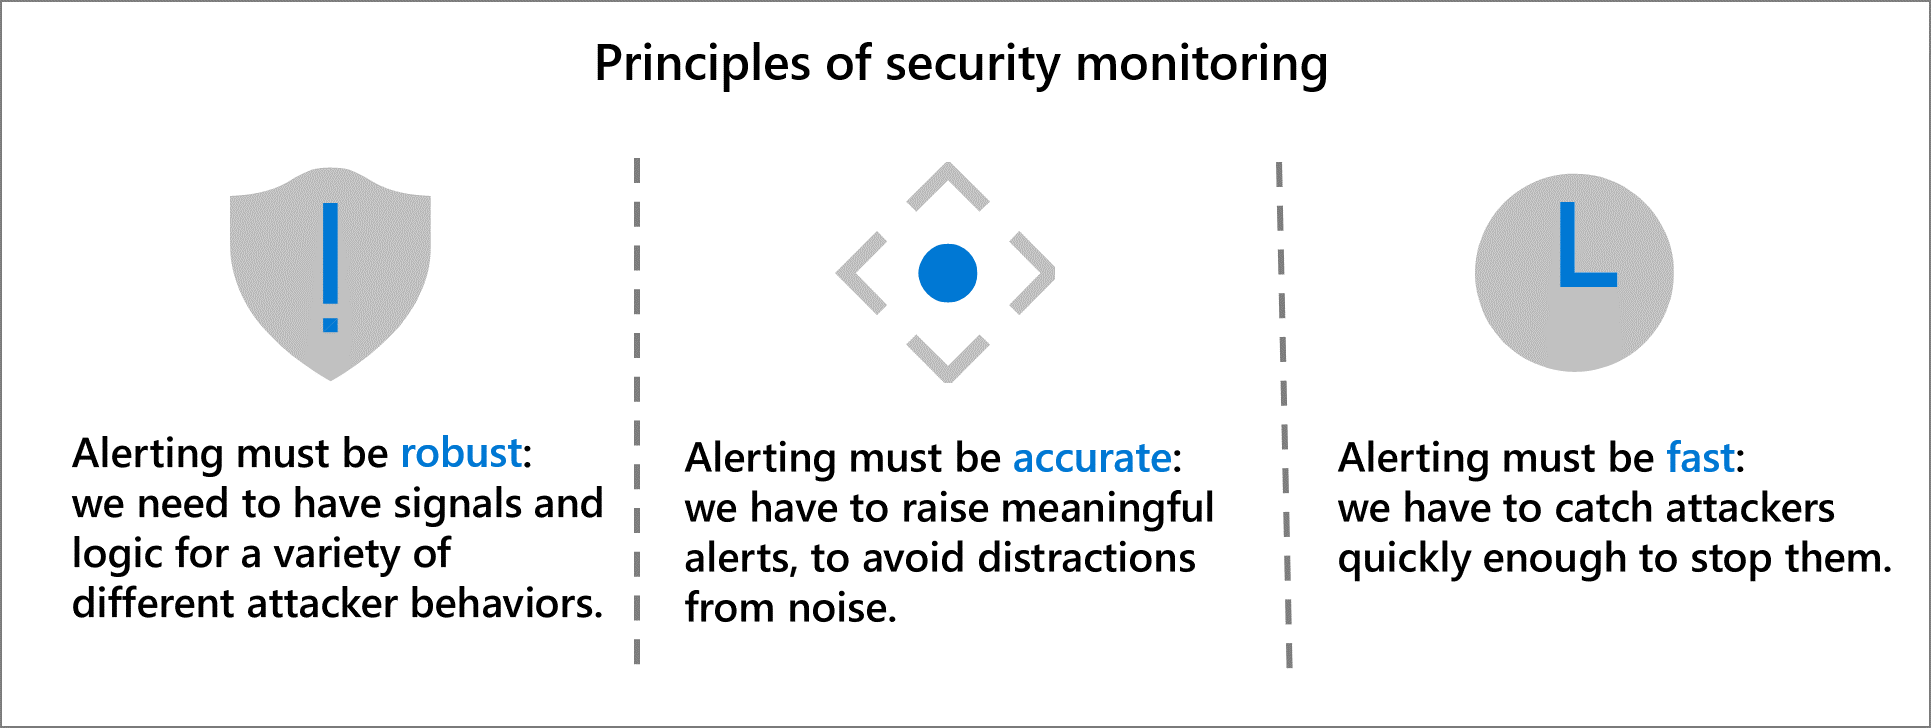 Principles of security monitoring: - Alerting must be robust: we need to have signals and logic for a variety of different attacker behaviors. - Alerting must be accurate: we have to raise meaningful alerts, to avoid distractions from noise. - Alerting must be fast: we have to catch attackers quickly enough to stop them